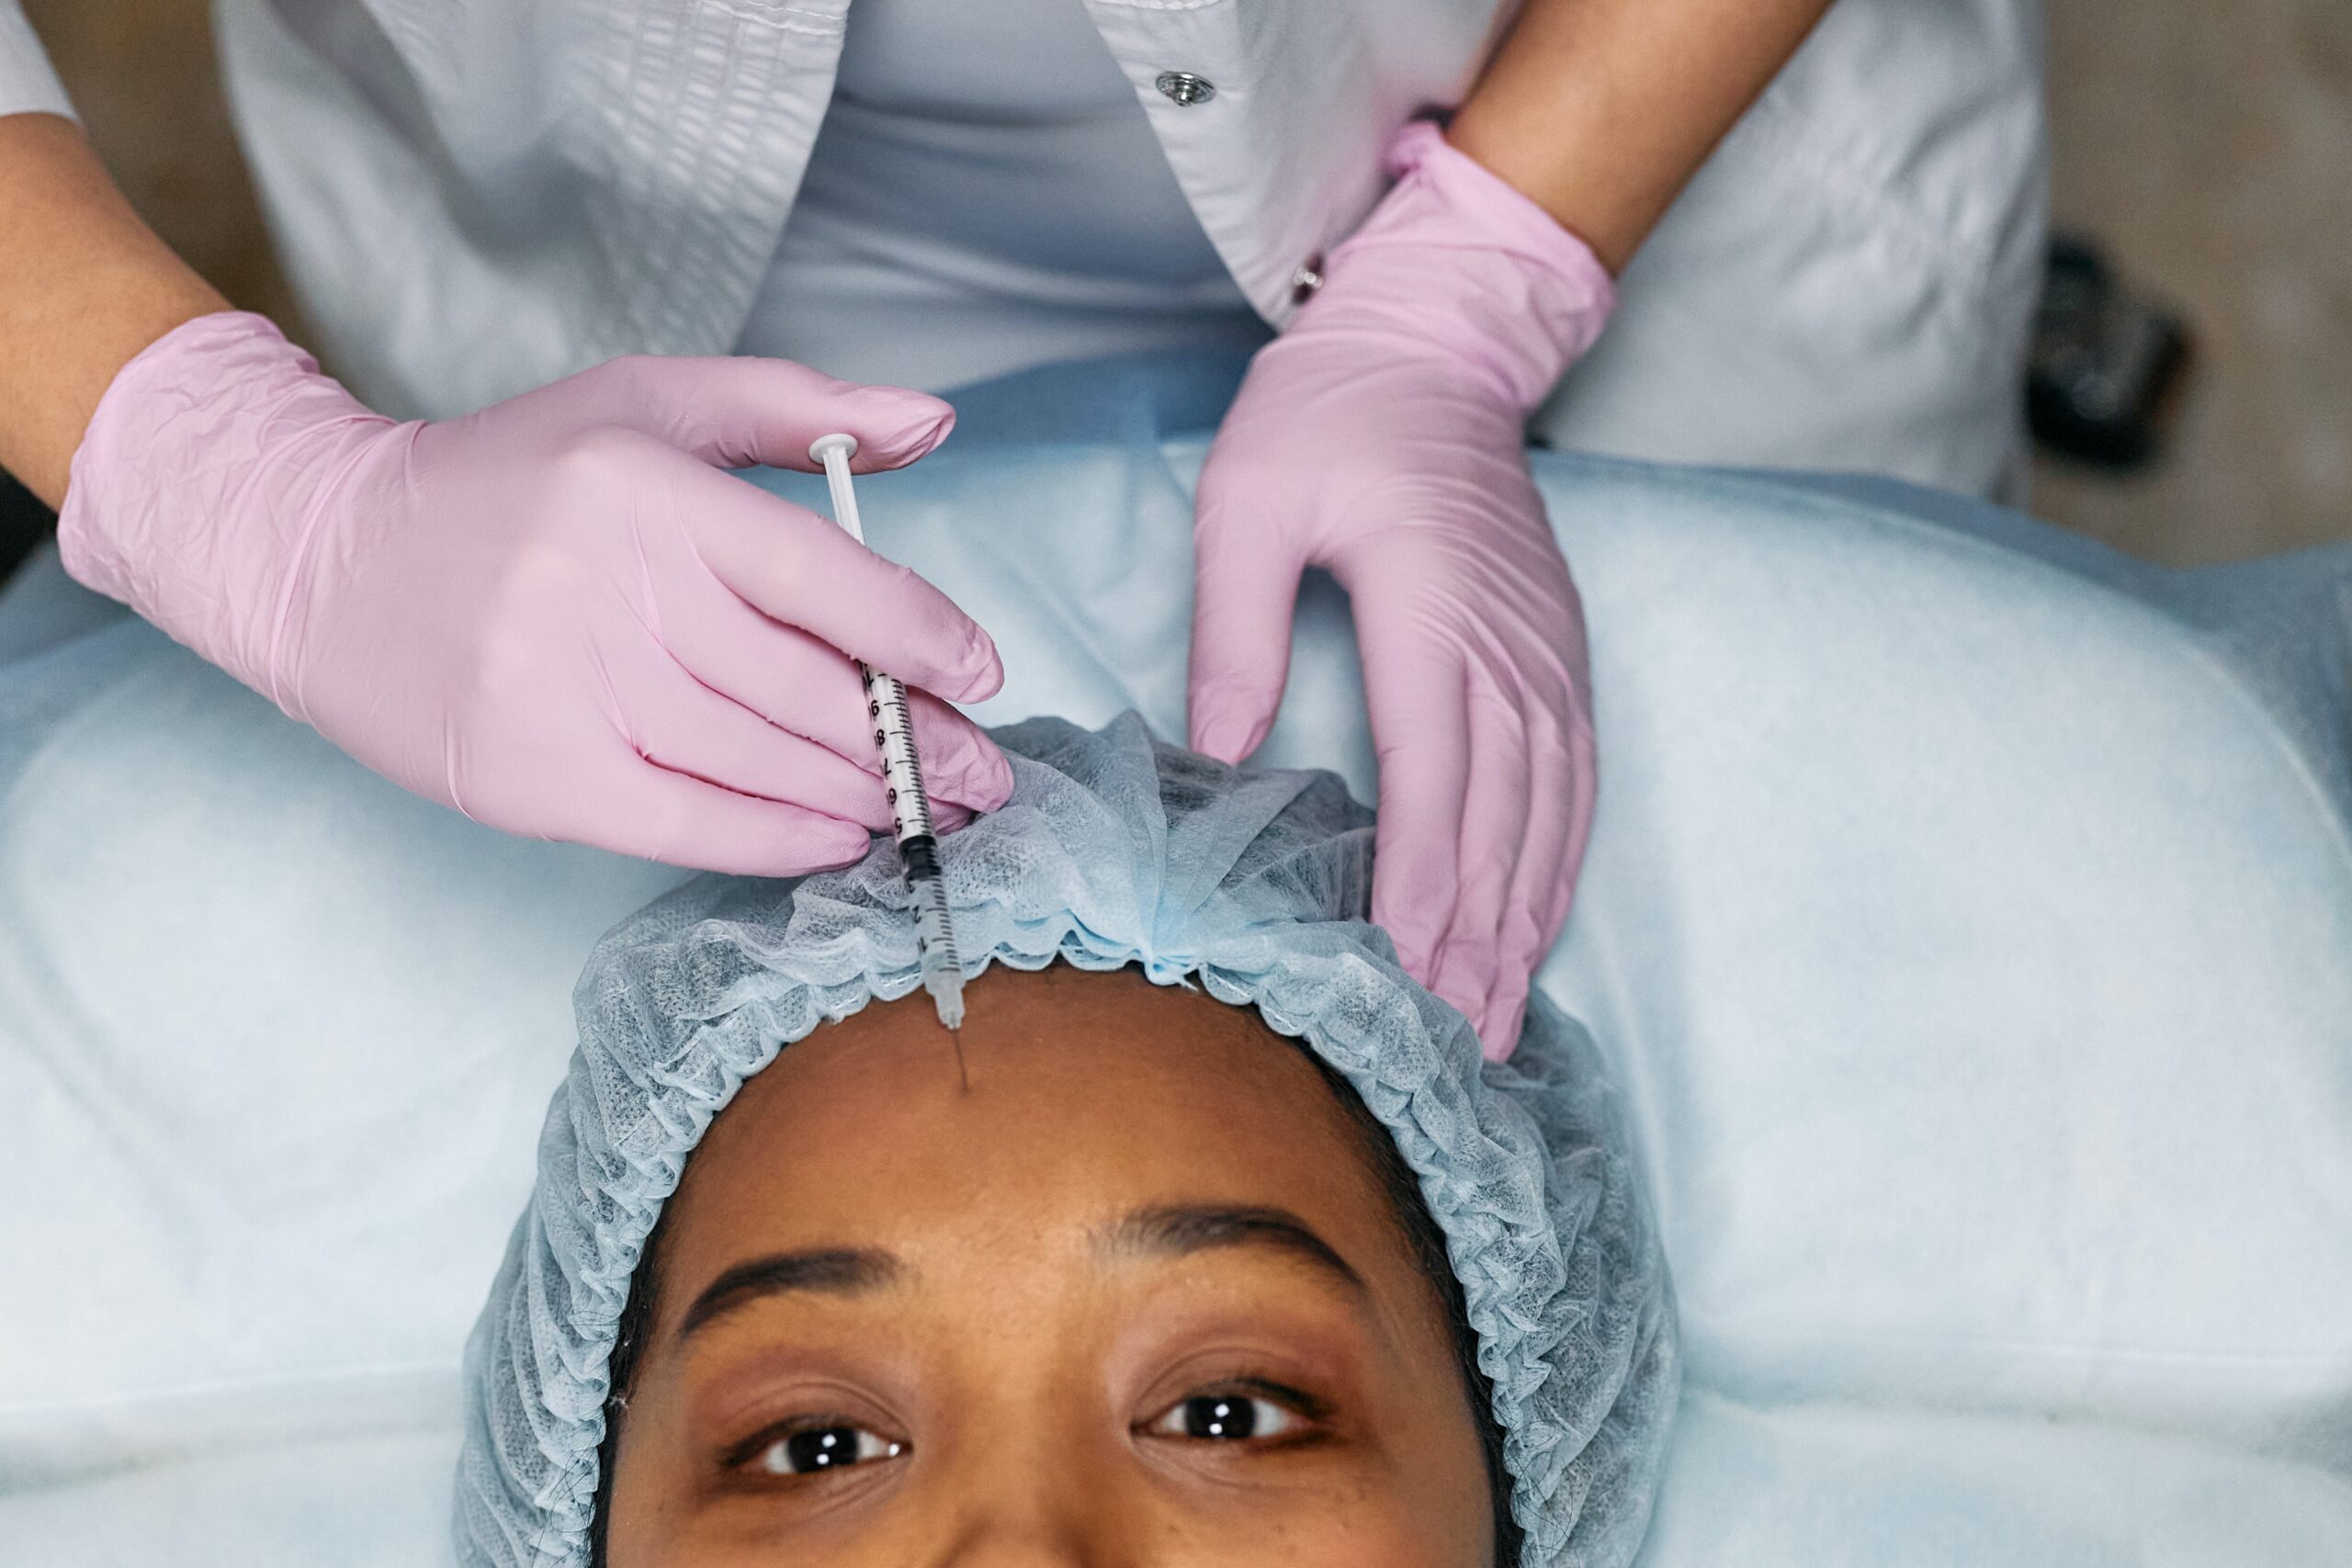 Picture of somebody getting anti-wrinkle injections or botox in their forehead, performed by an aesthetics practitioner with pink gloves.